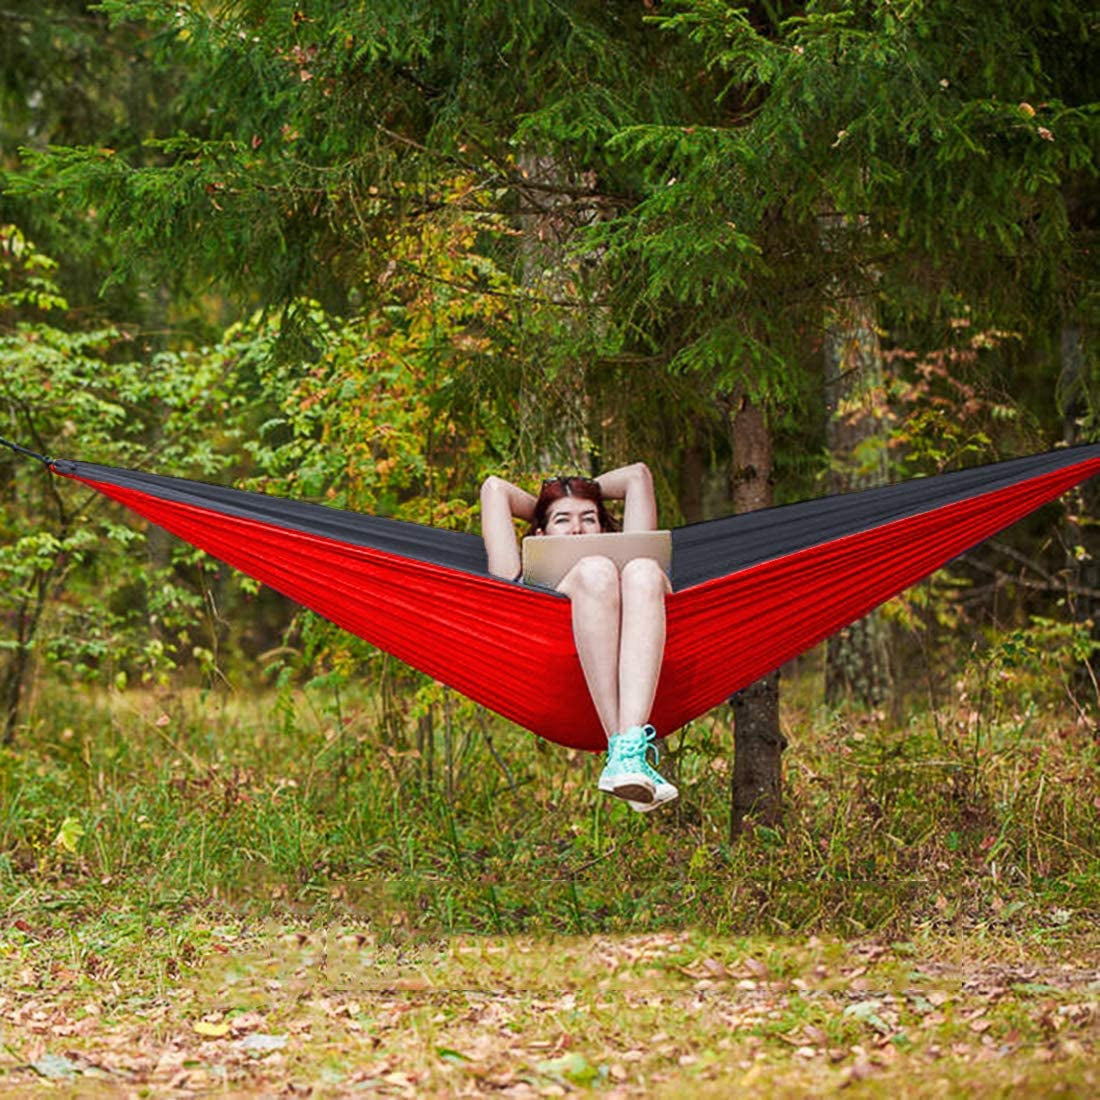 Camping Hammock Double with 2 Tree Straps Made of Portable Lightweight Nylon Parachute for Backpacking,Travel and Outdoor Survival